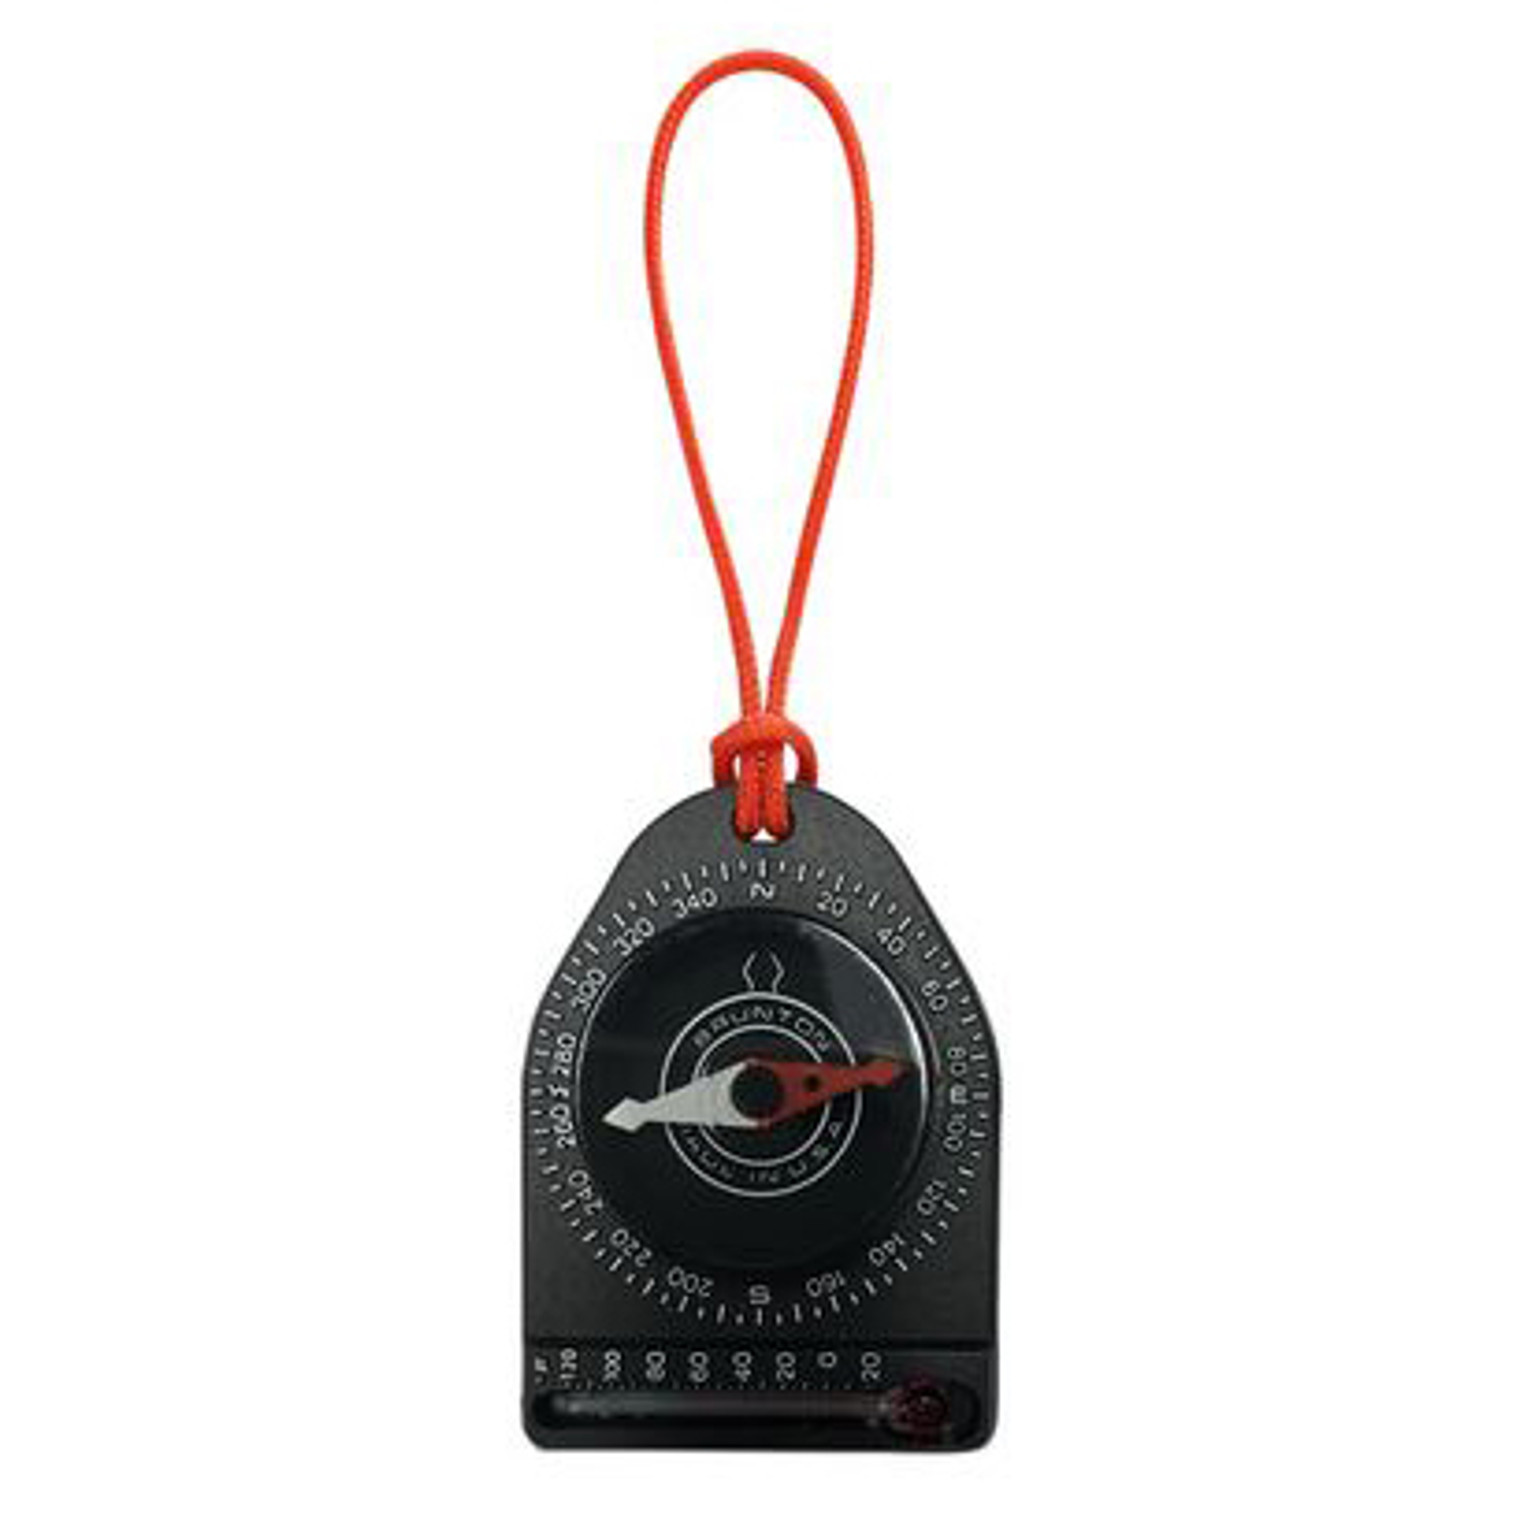 Tagalong Key Ring Compass, Thermometer